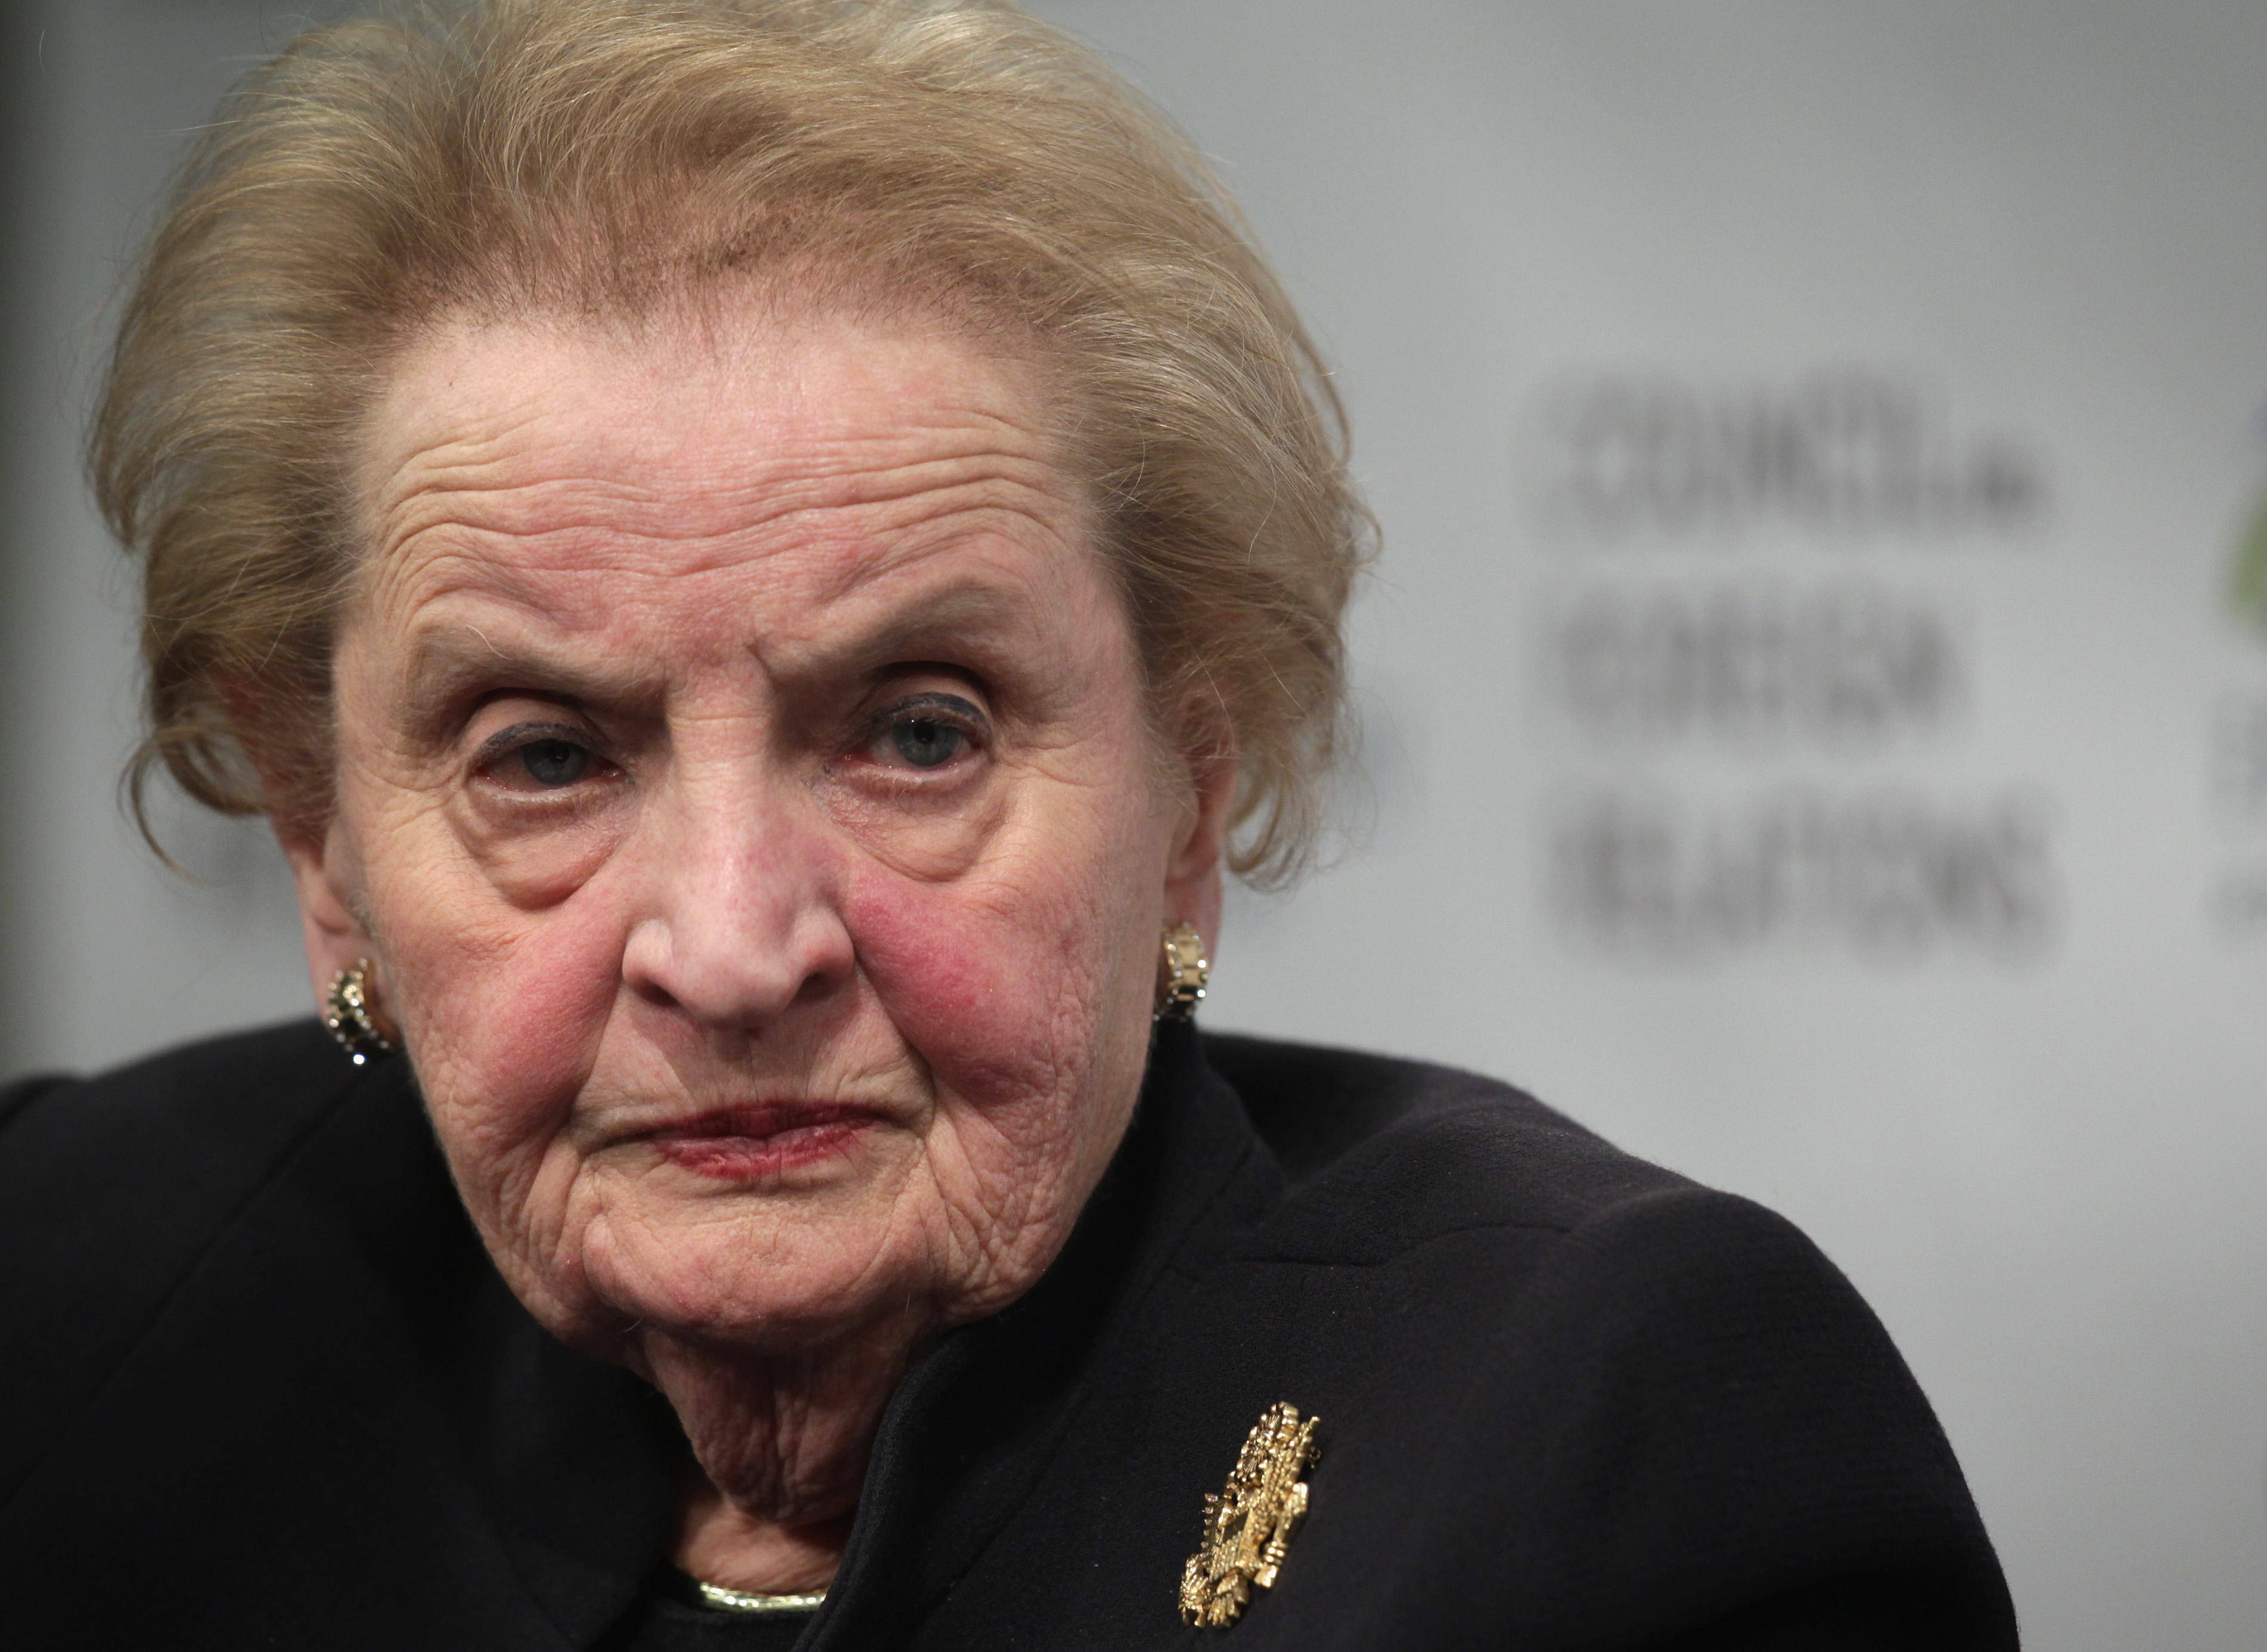 Former U.S. Secretary of State Madeleine Albright participates in a discussion at the Council on Foreign Relations in Washington, D.C., on January 29, 2015. (Alex Wong—Getty Images)